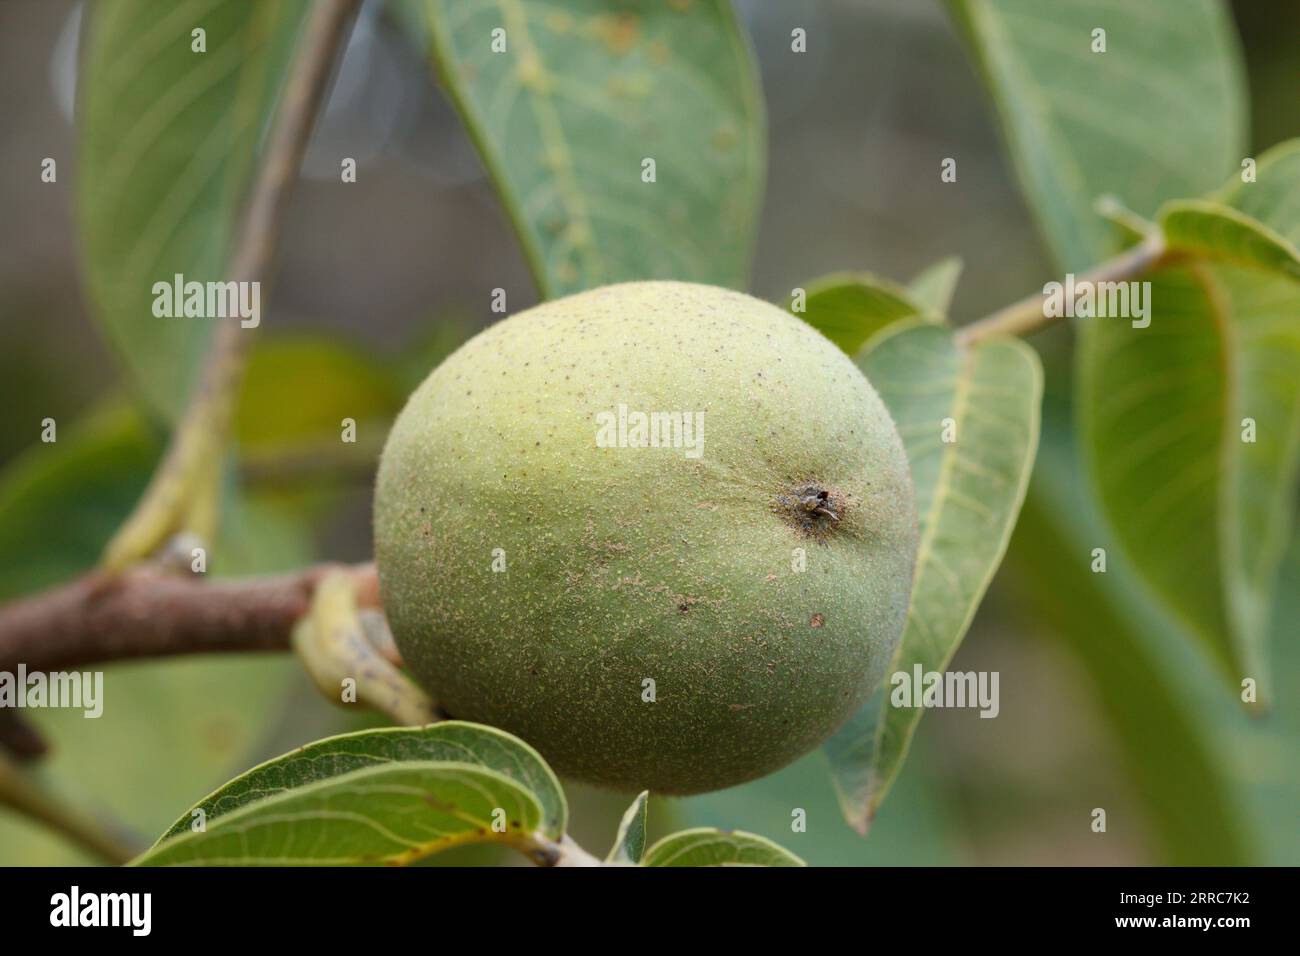 Juglans regia, walnut between leaves ripening in the walnut for later harvesting, Alcoi, Spain Stock Photo